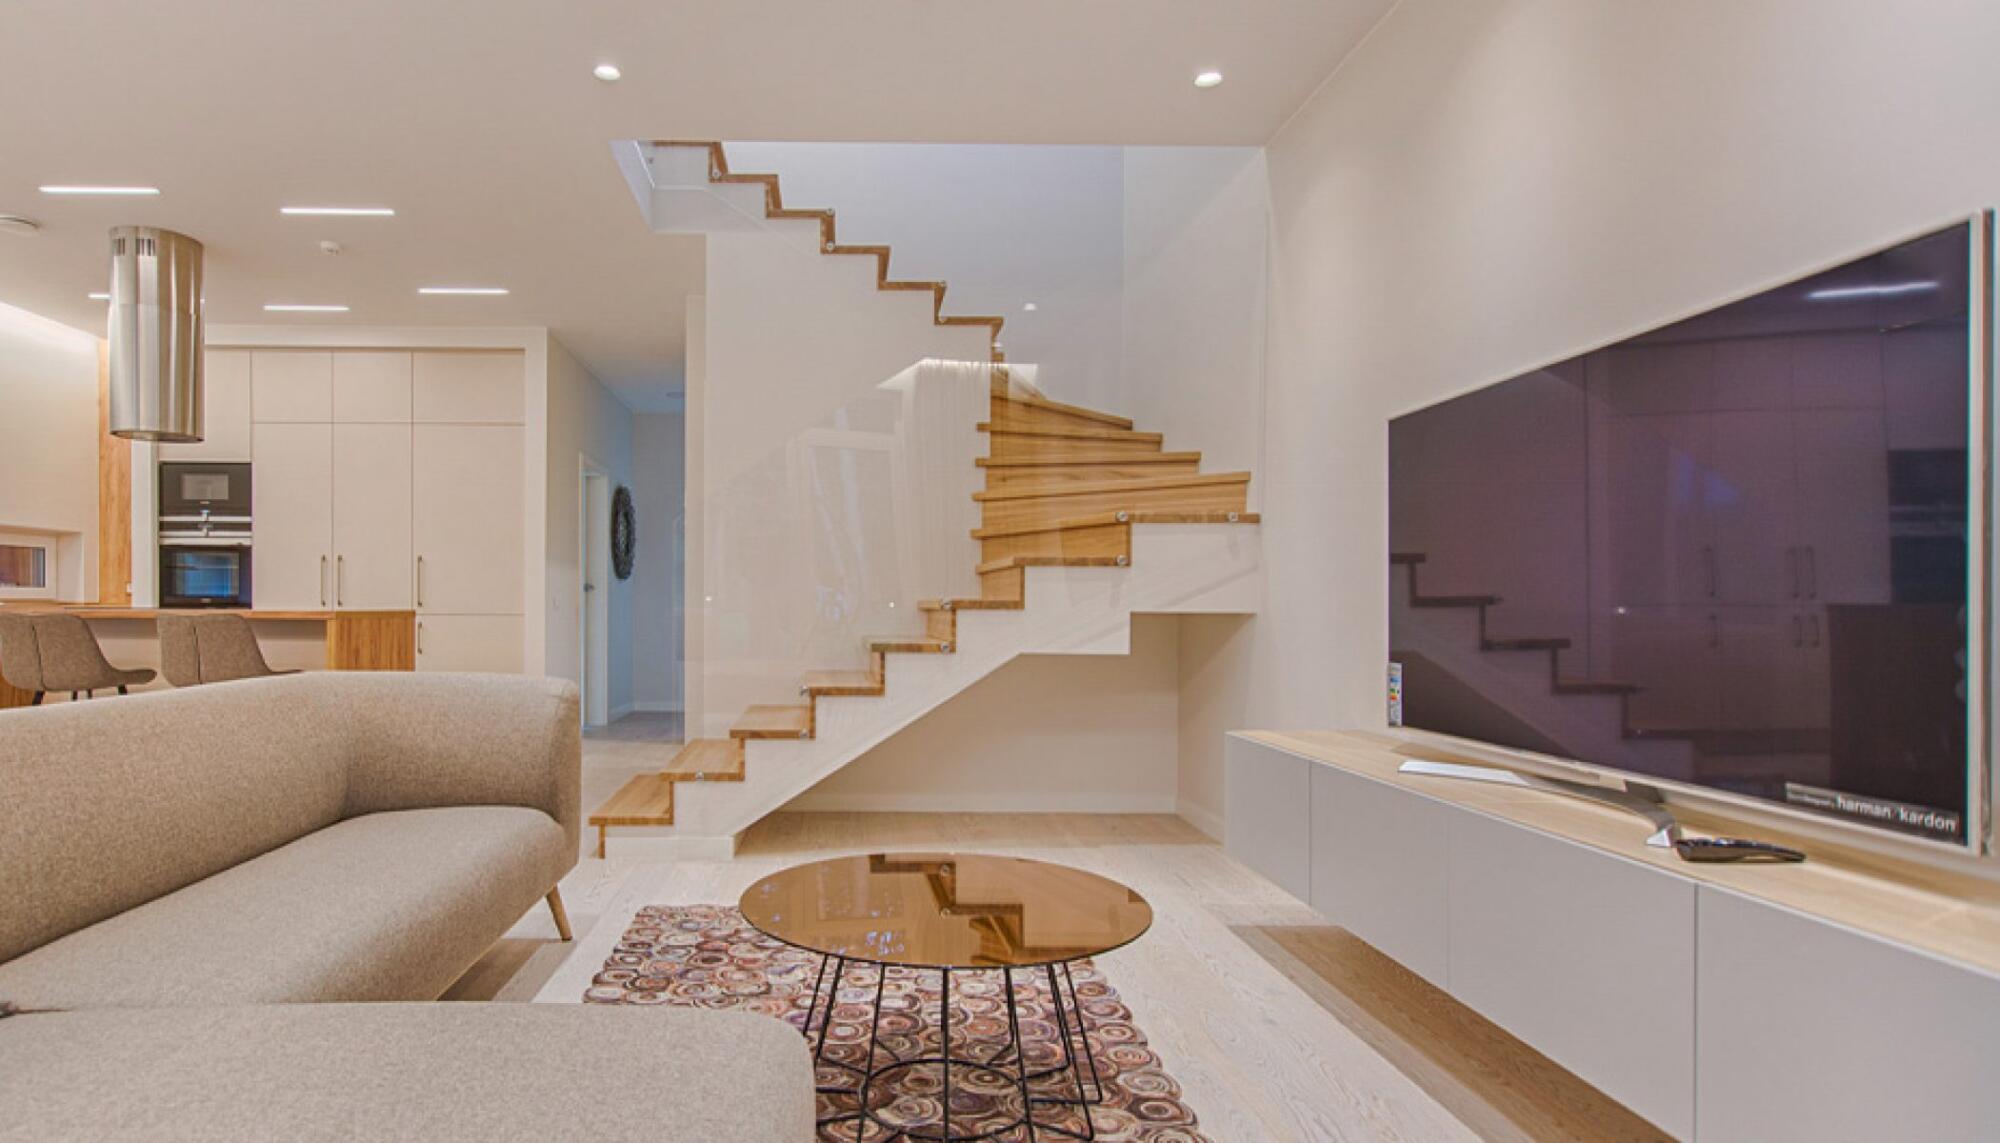 A modern living room with stairs and a TV in a finished basement.